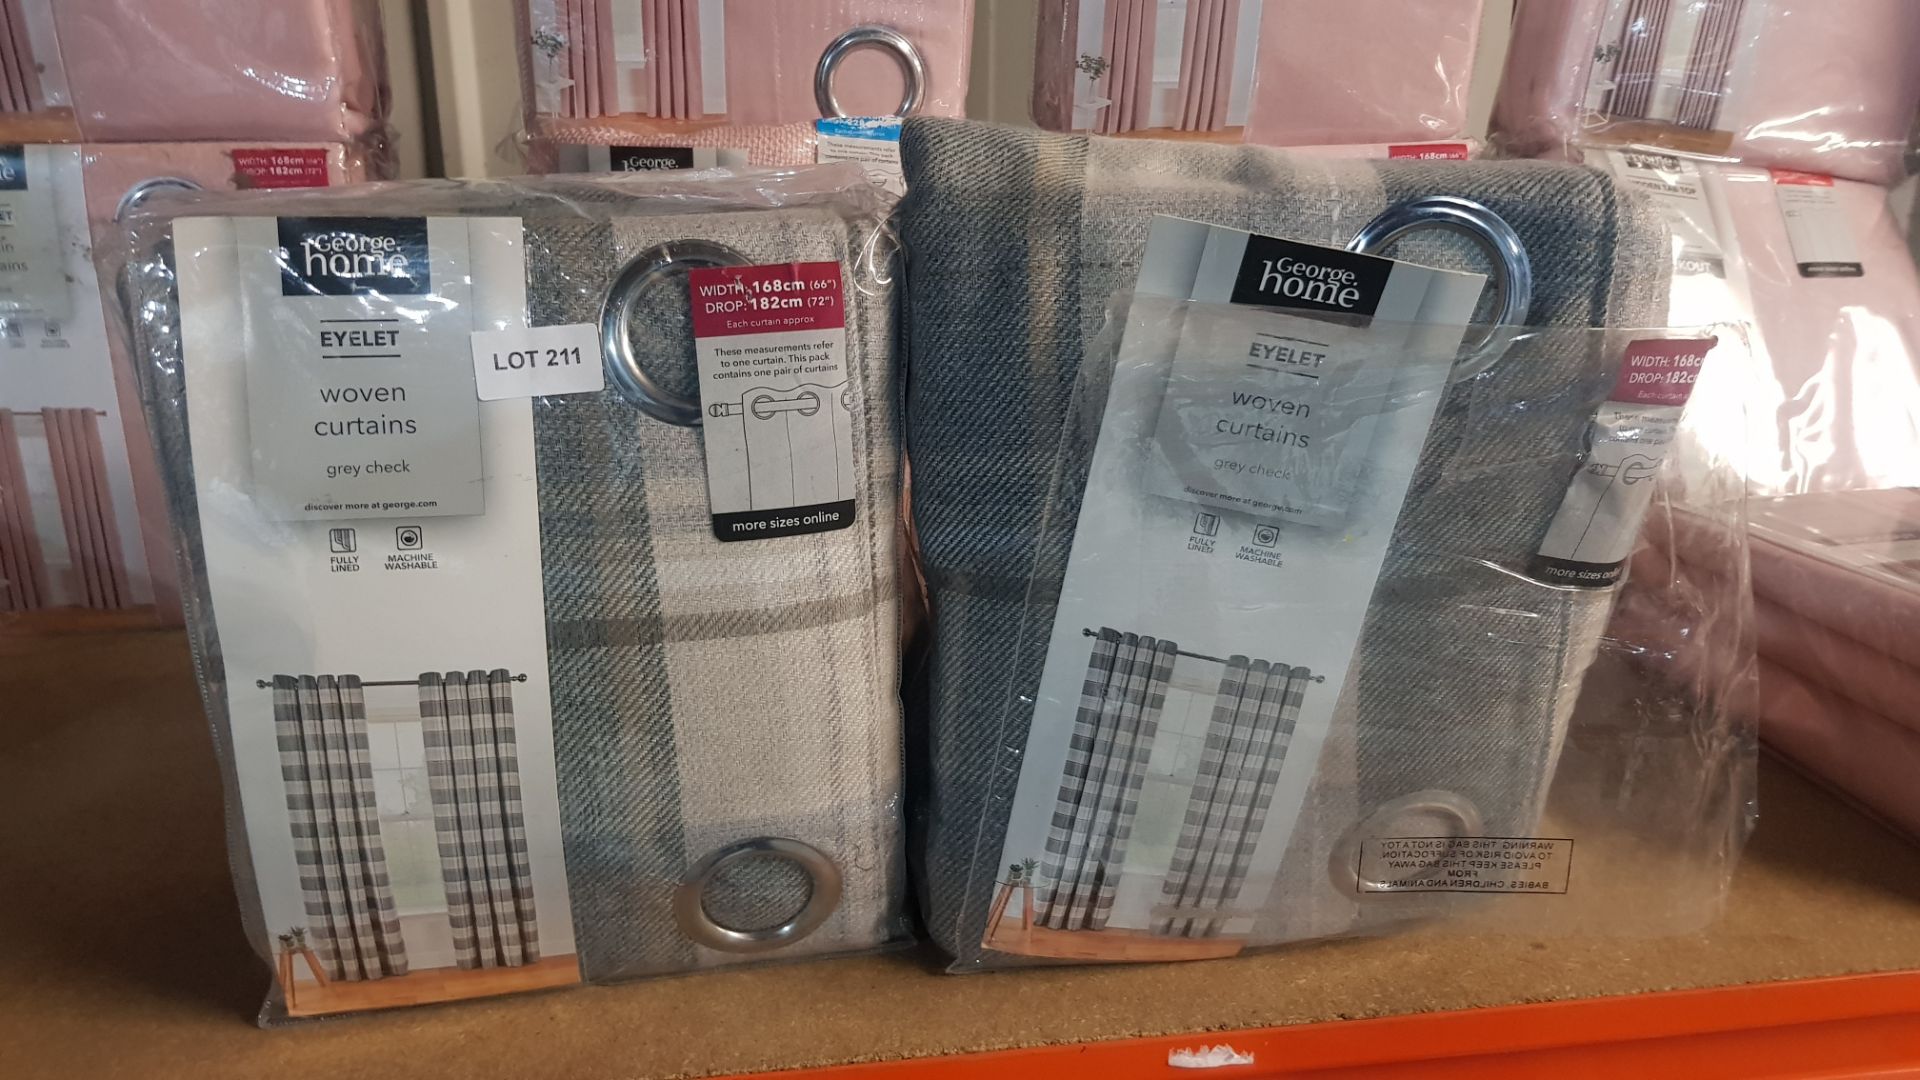 2 X Eyelet Woven Curtains Grey Check (Width 168cm Drop 182cm) RRP £60 Each 2 X Eyelet Woven Curtains